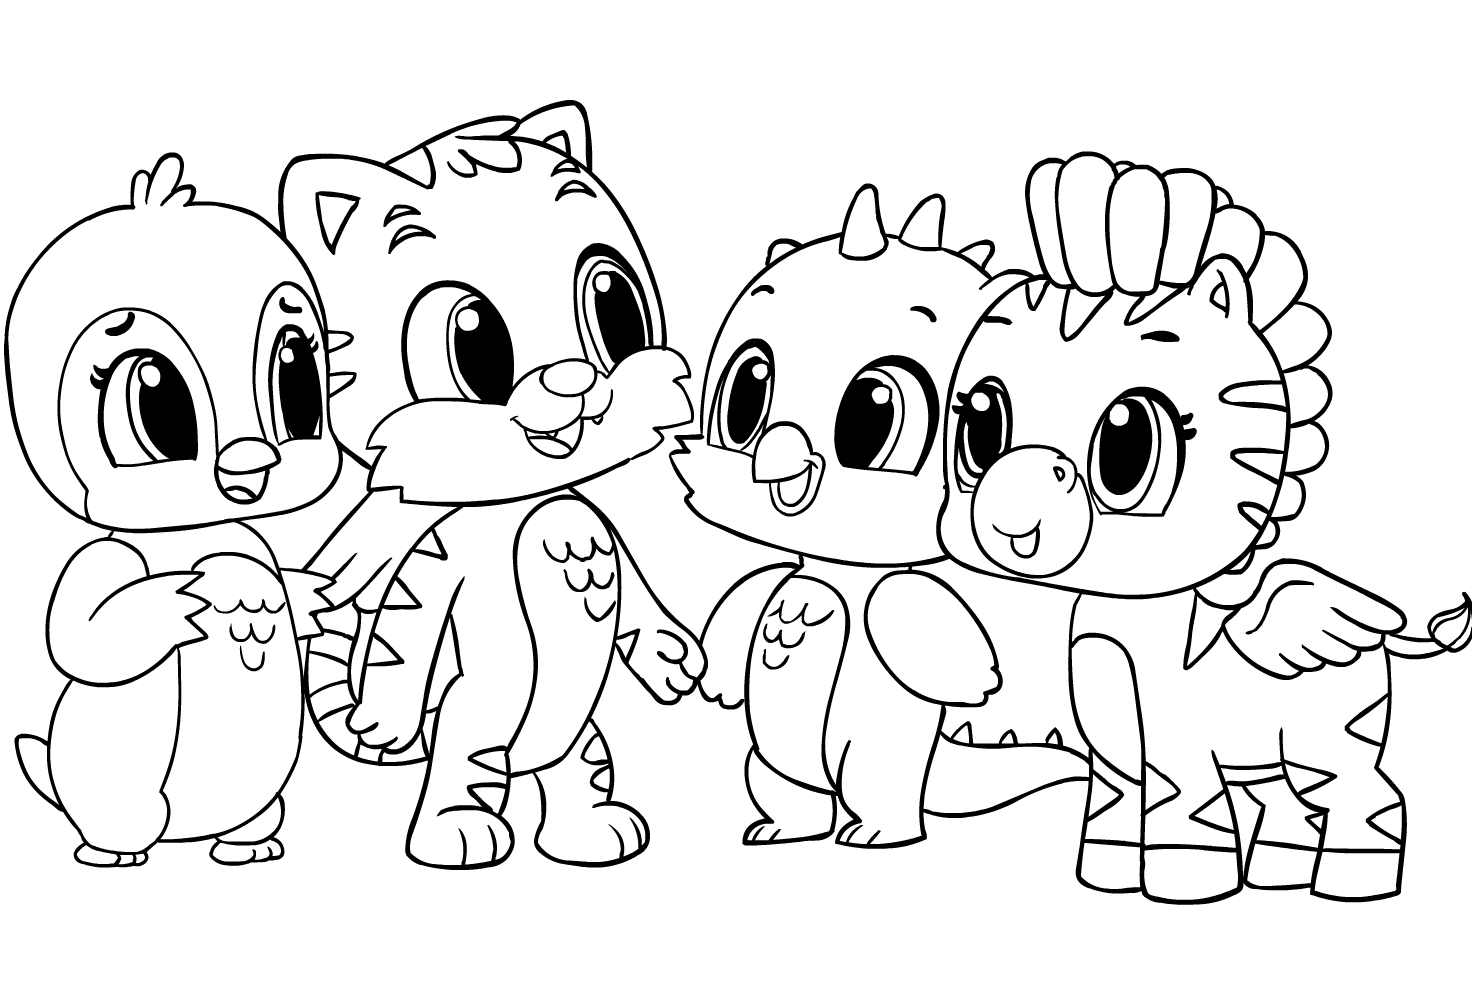 Hatchimals coloring page - Drawing 5